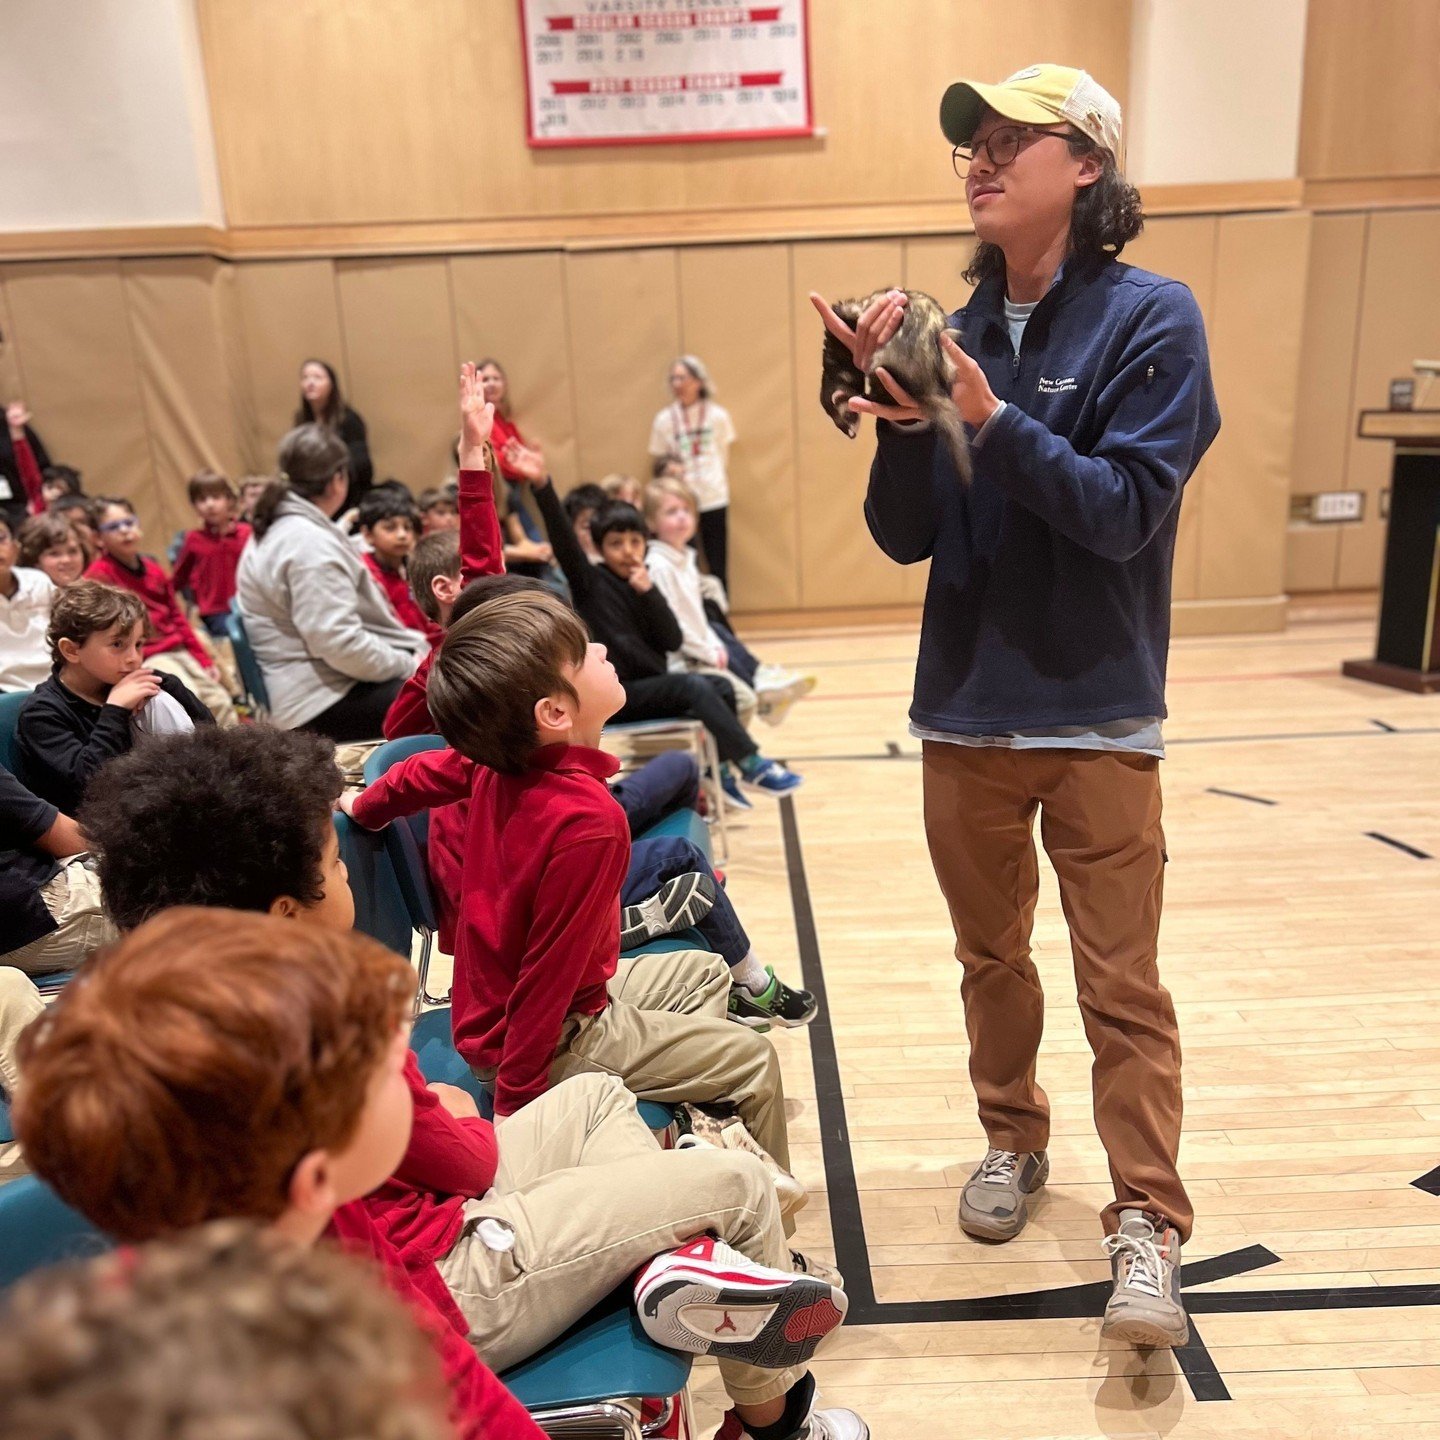 It was a school-wide celebration on Friday as we commemorated Biodiversity Day! From engaging ecological activities to inspiring guest speakers and adventurous scavenger hunts, it was a day brimming with environmental stewardship. Huge thanks to The 